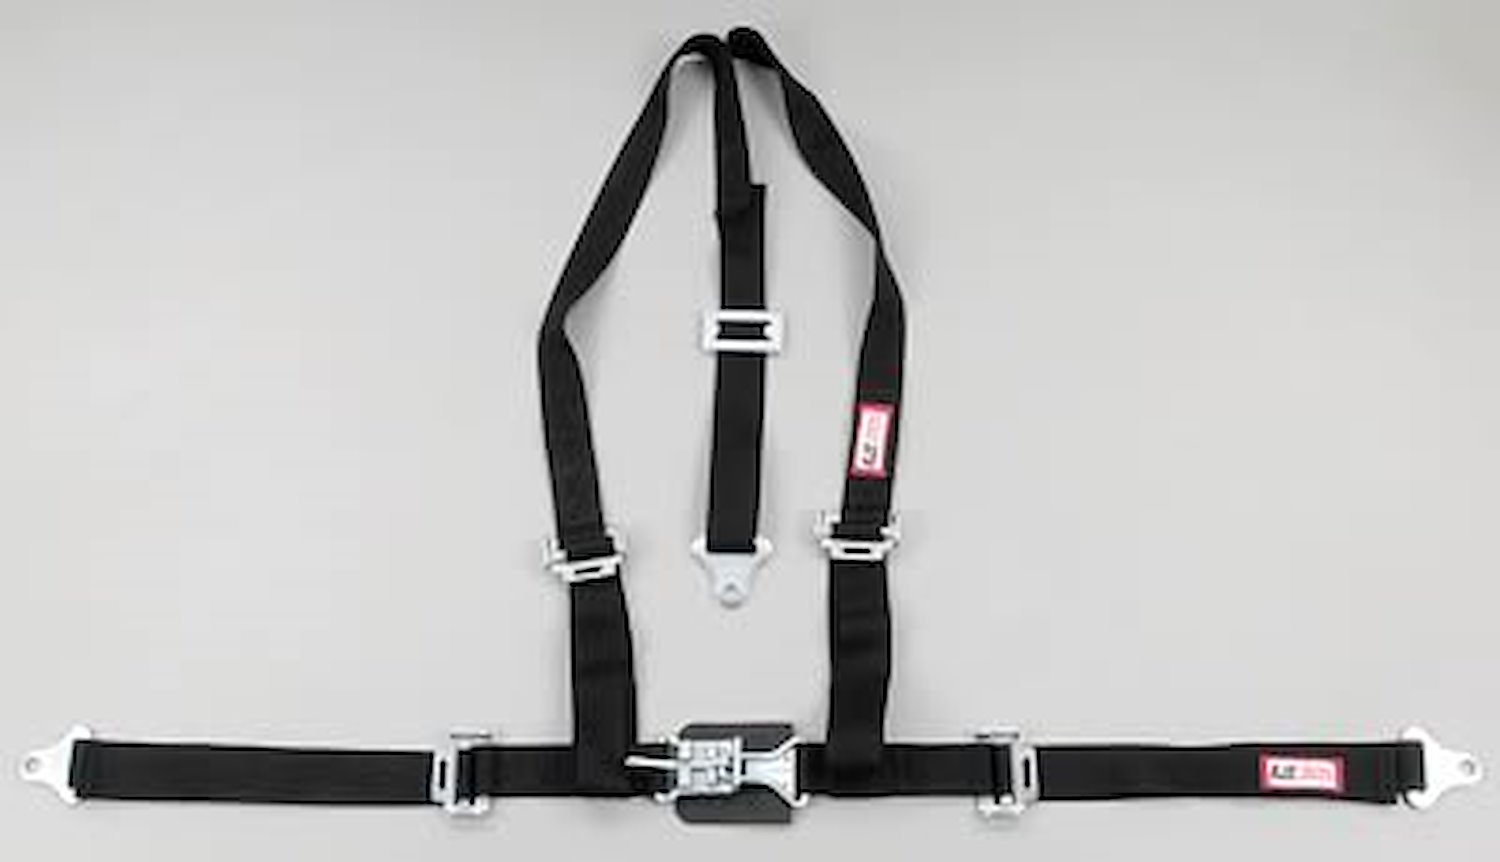 NON-SFI L&L HARNESS 2 PULL UP Lap Belt SNAP SEWN IN 2 S.H. Individual ROLL BAR Mount WRAP/BOLT BLACK